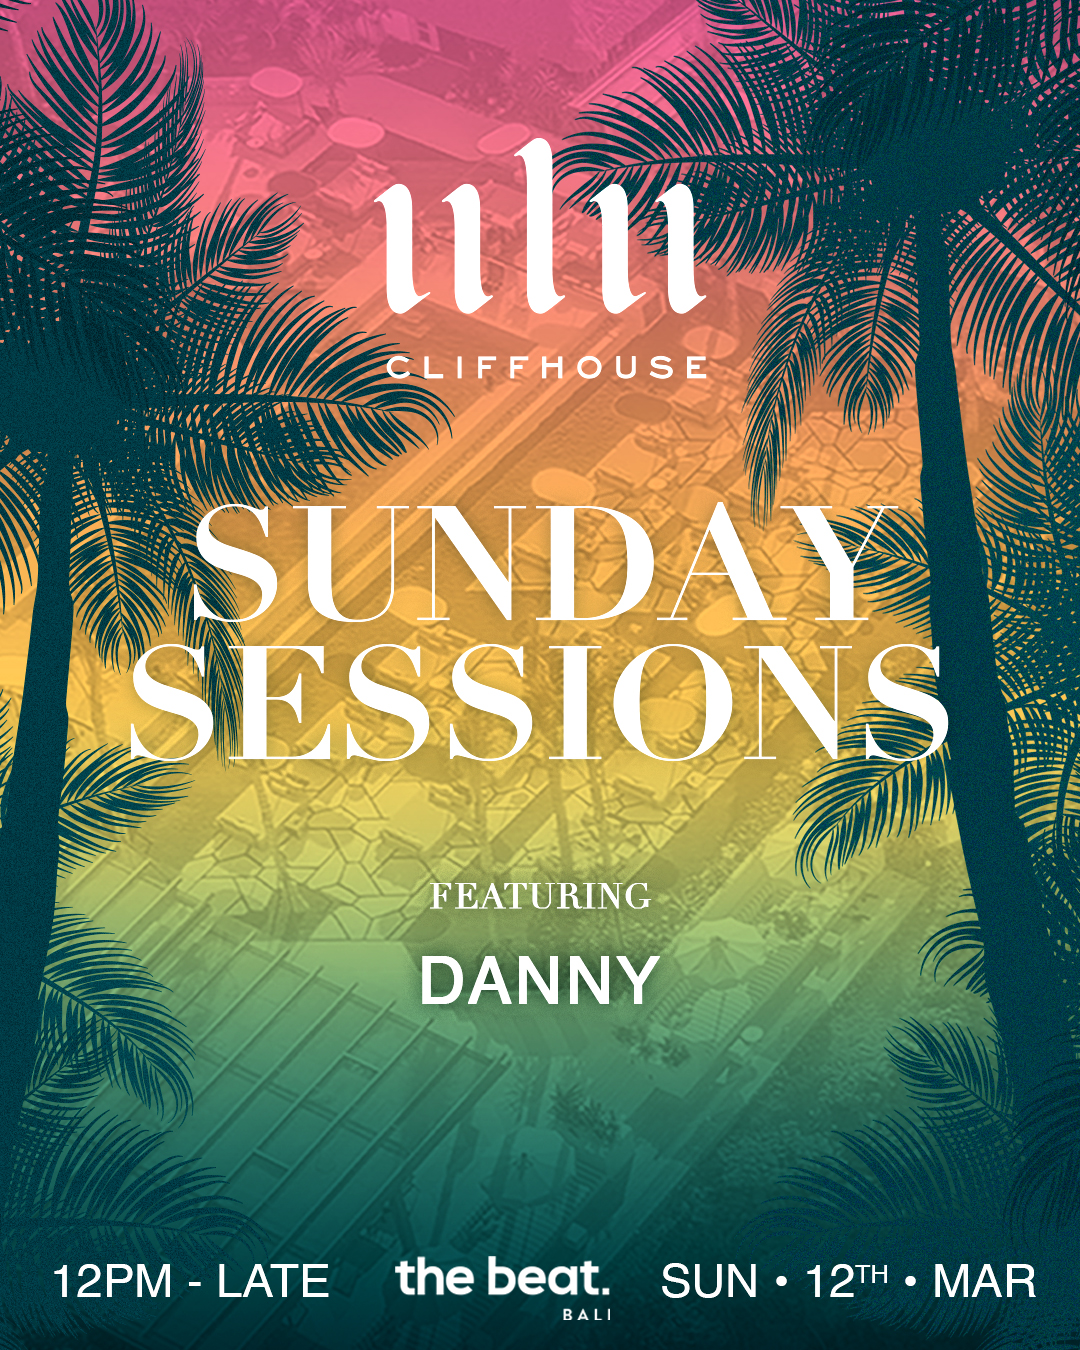 SUNDAY SESSIONS AT ULU CLIFFHOUSE – MARCH 12TH thumbnail image